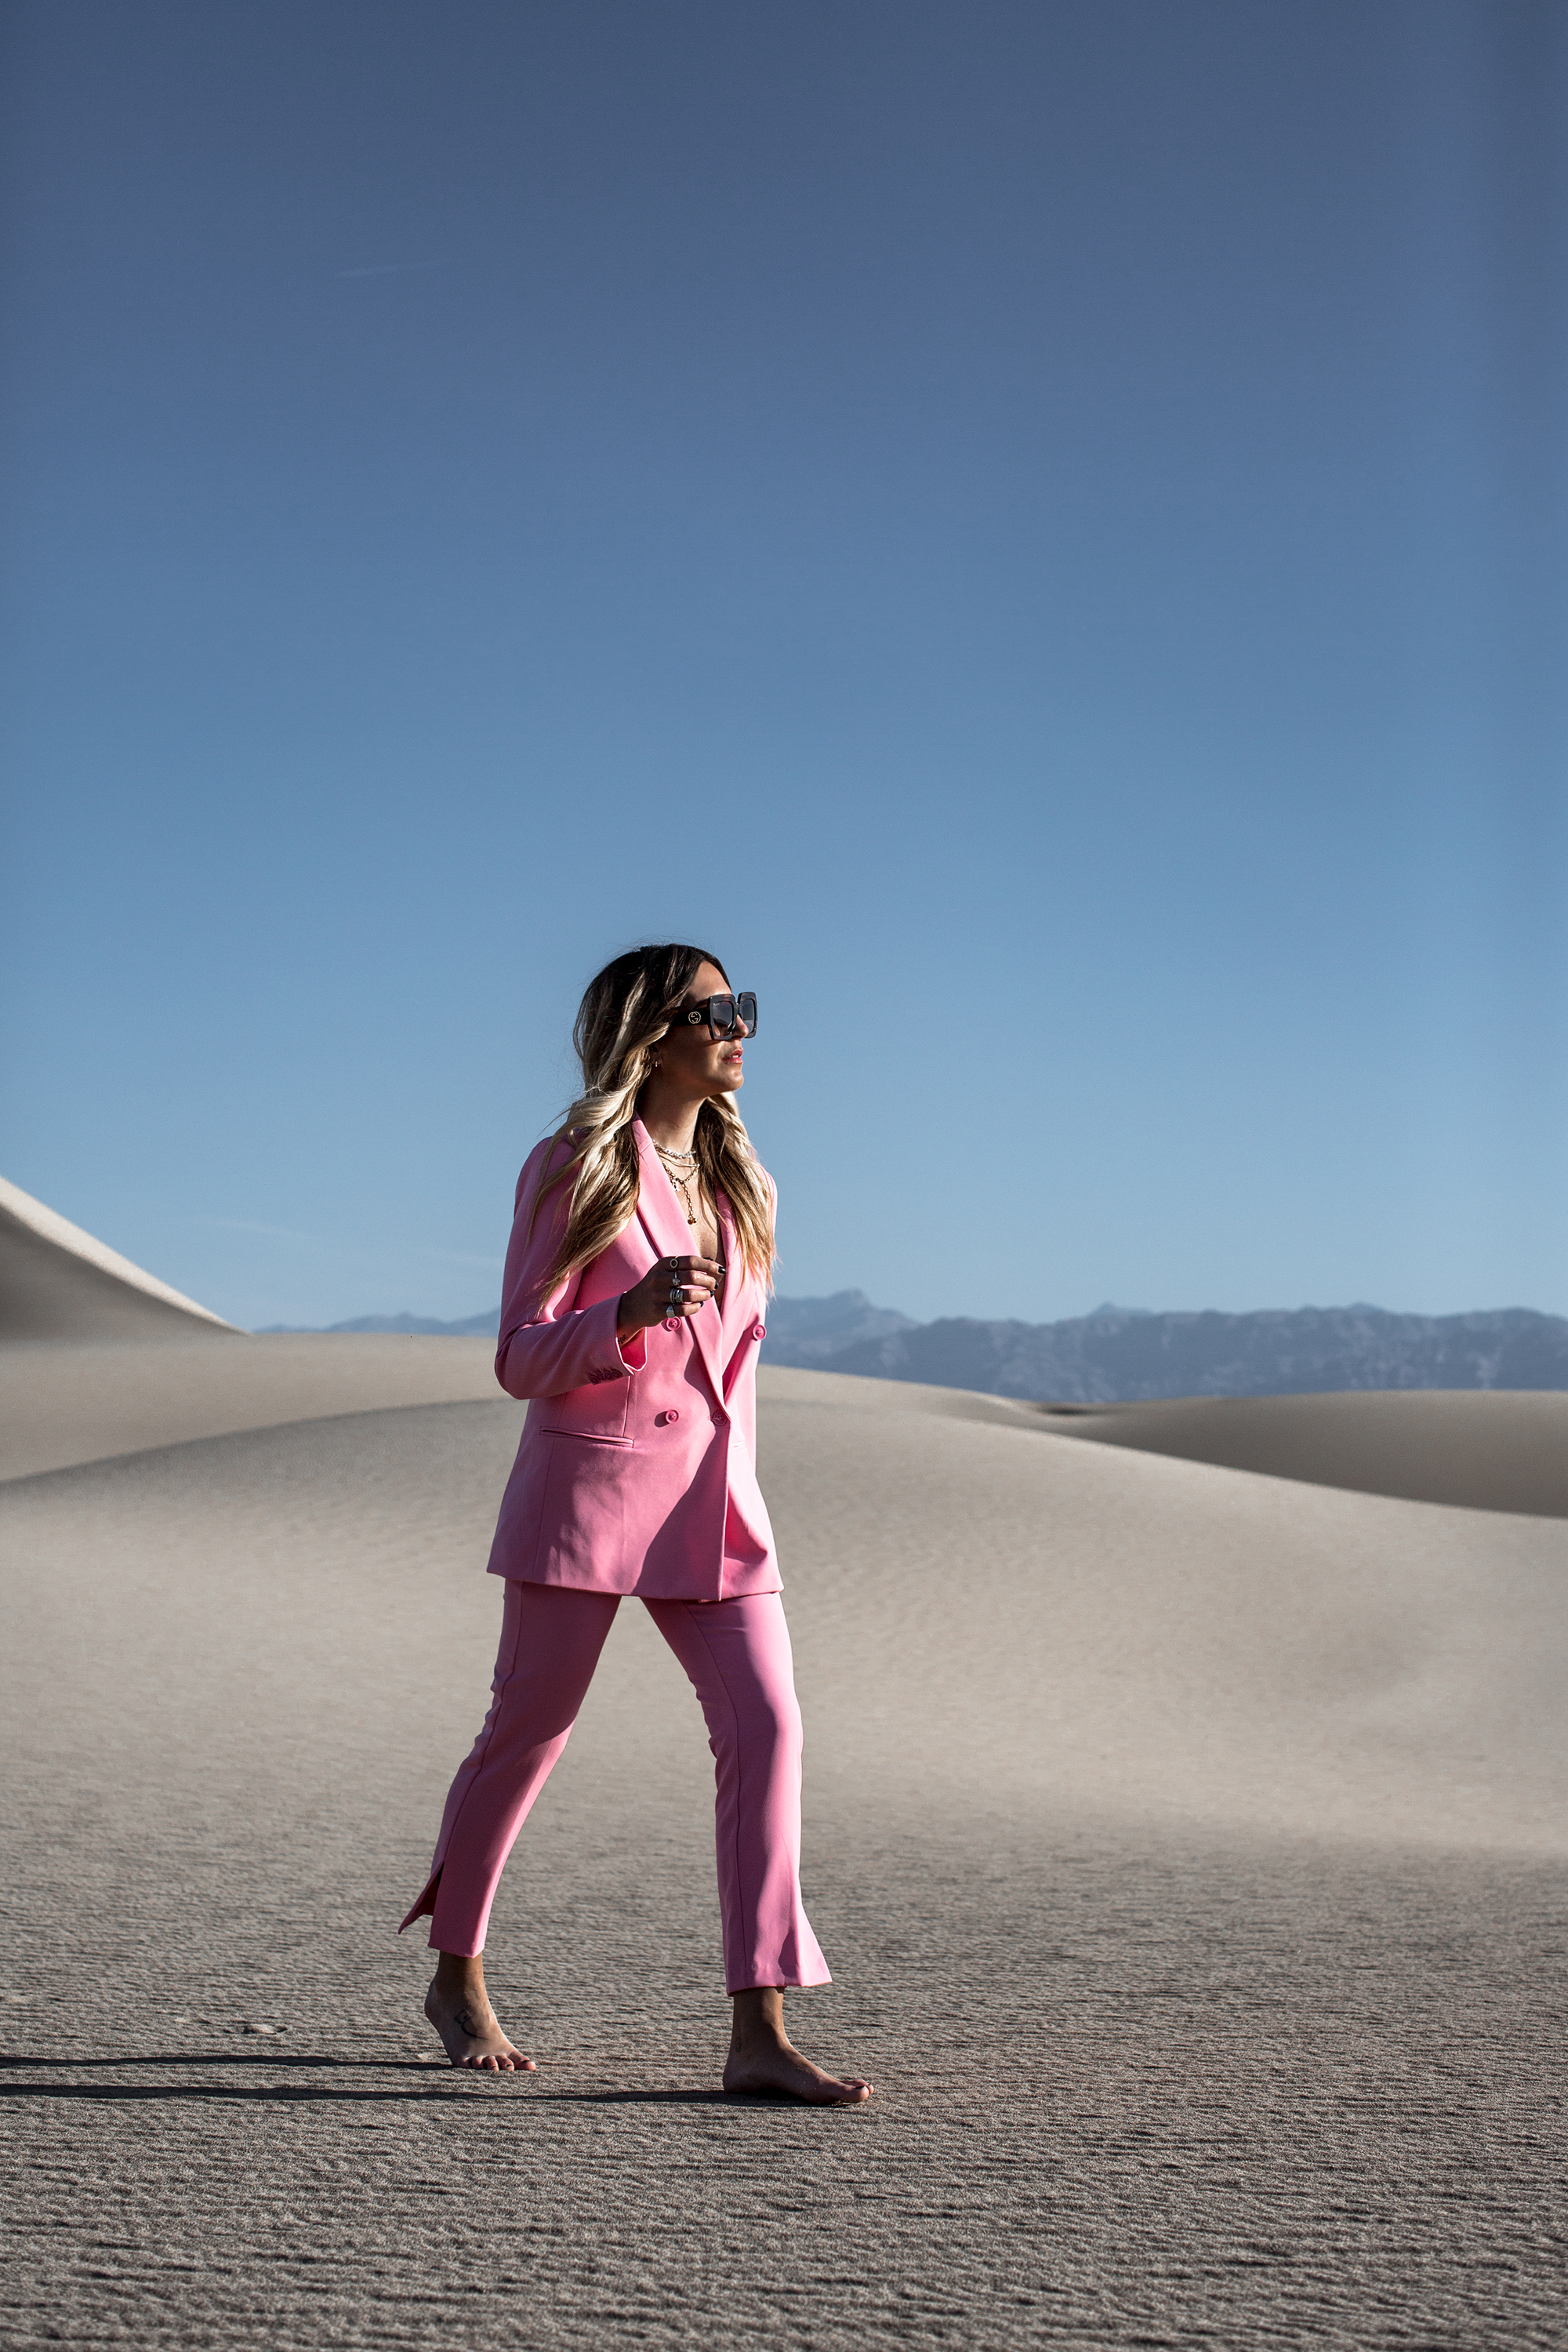 black-palms-x-reserved-mesquite-sand-dunes-death-valley-usa-pink-suit-14